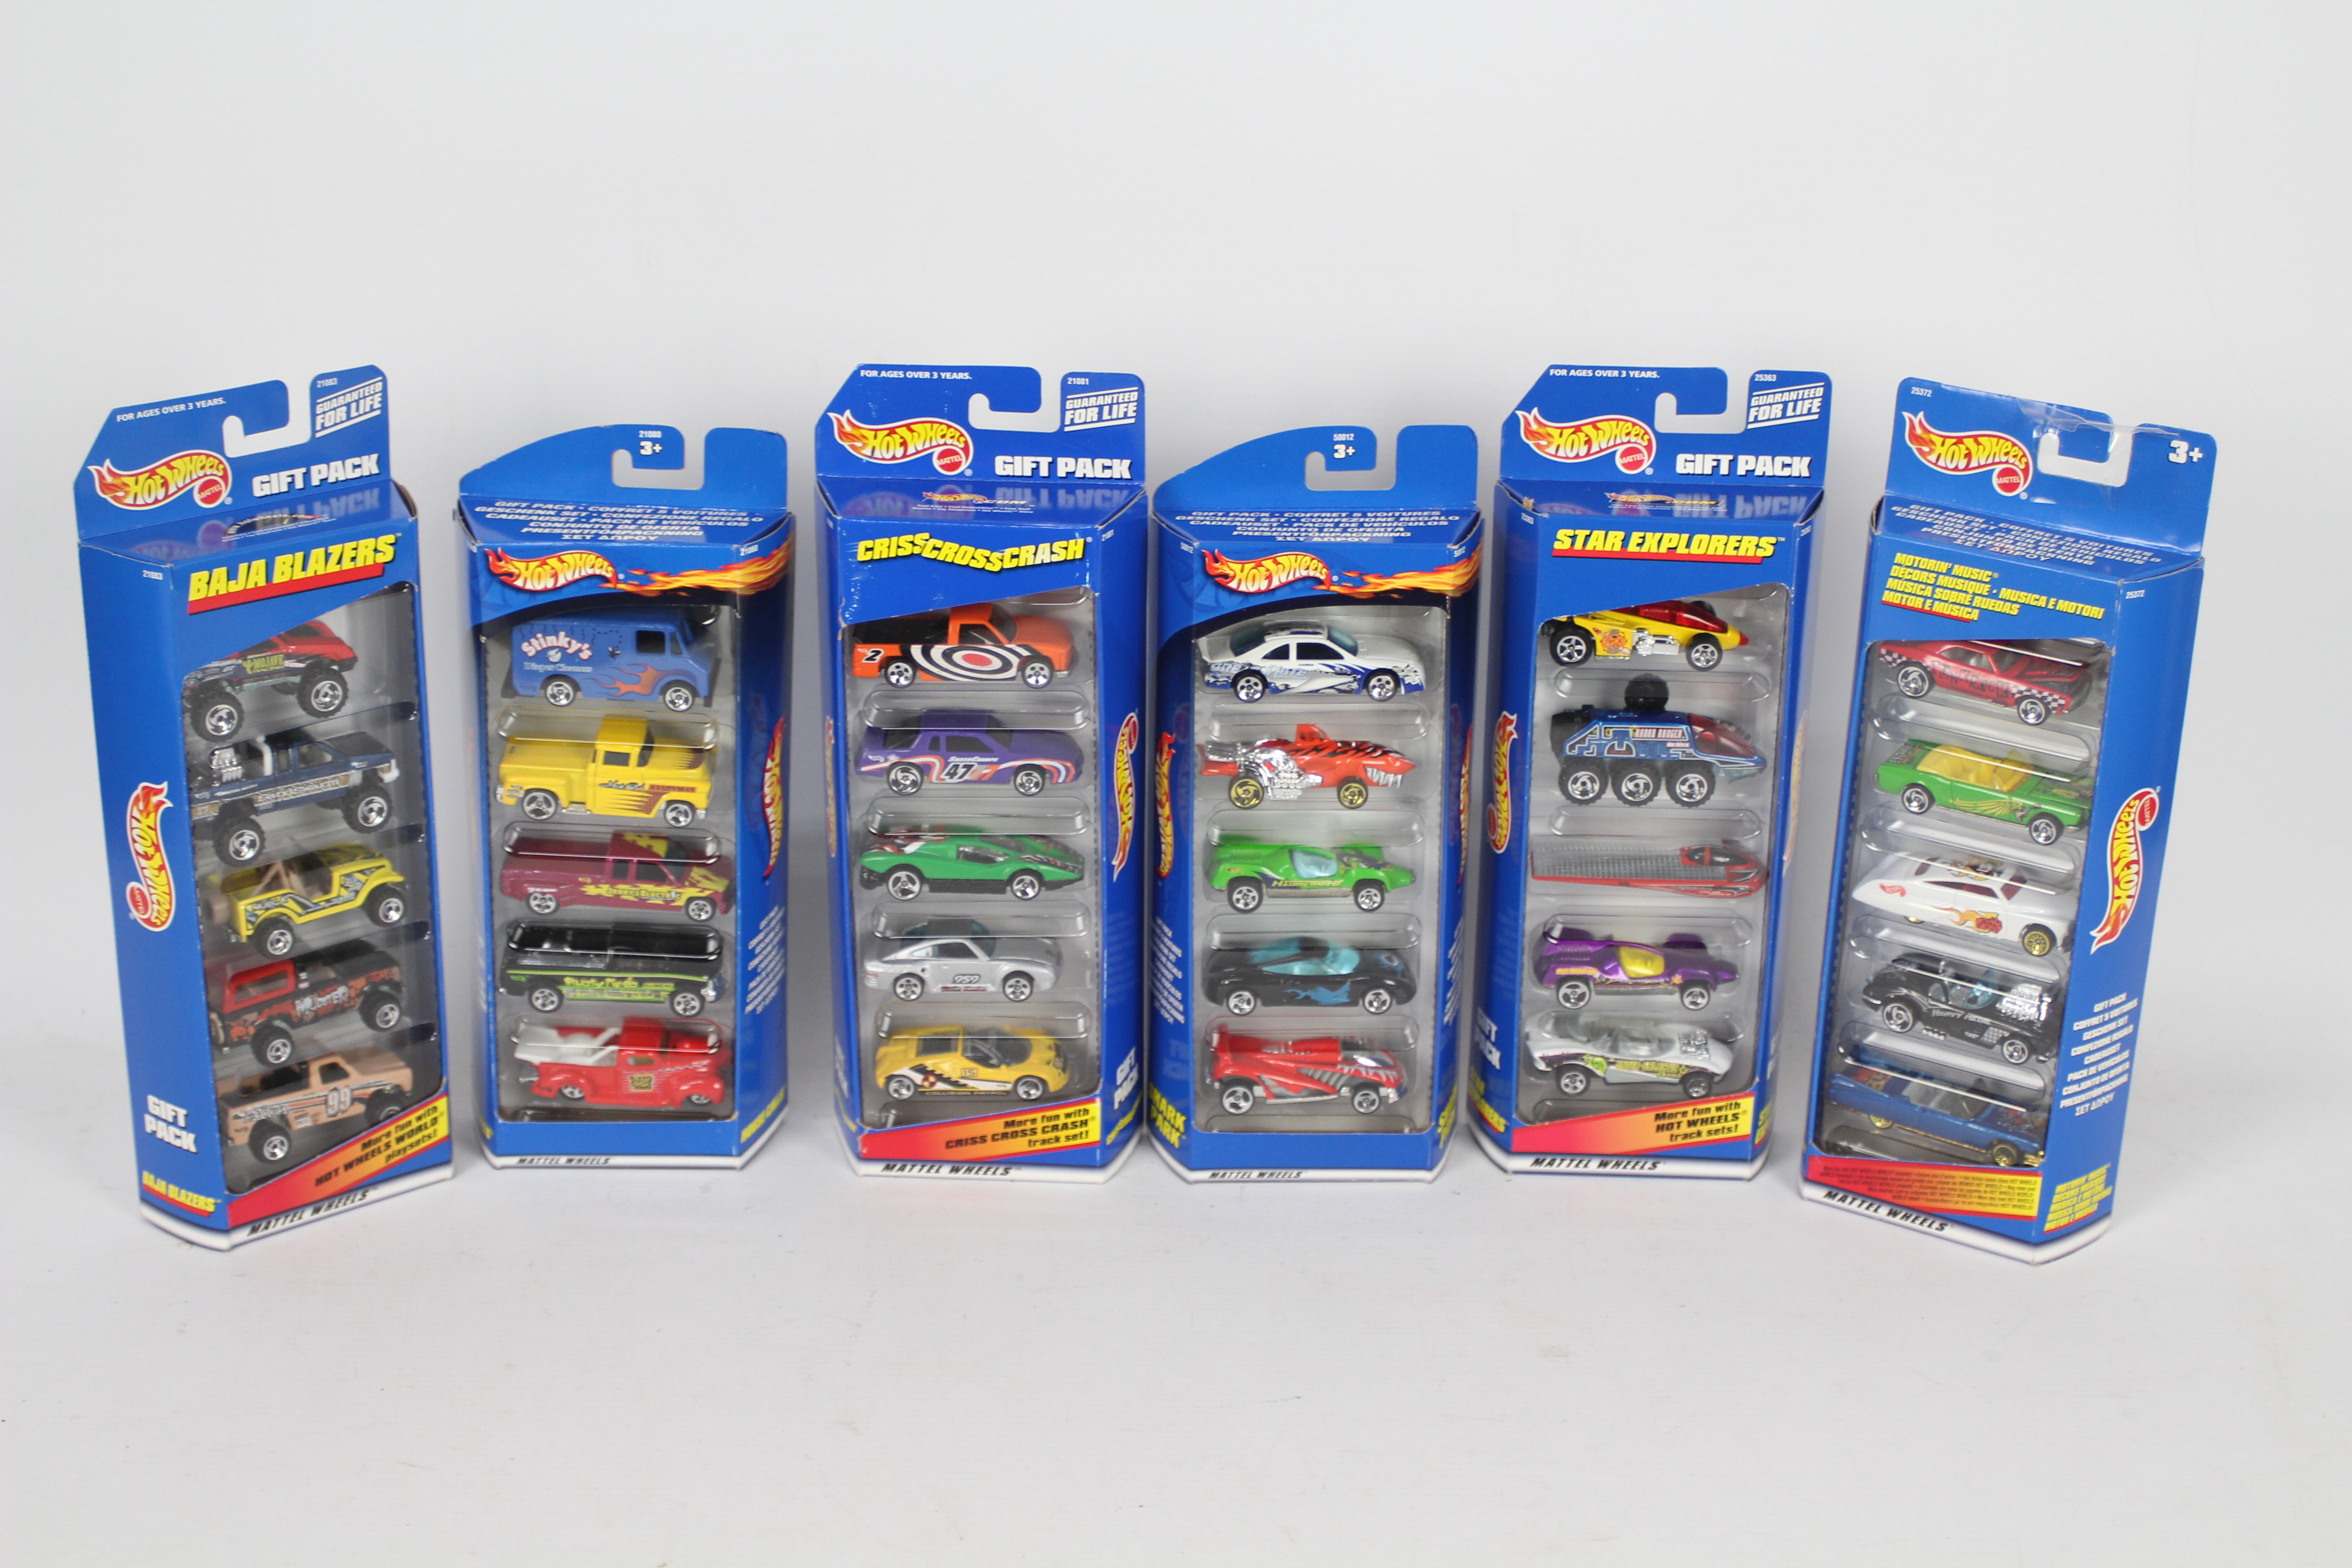 Hot Wheels - 6 x Gift Packs of five cars including House Calls truck pack # 21080,